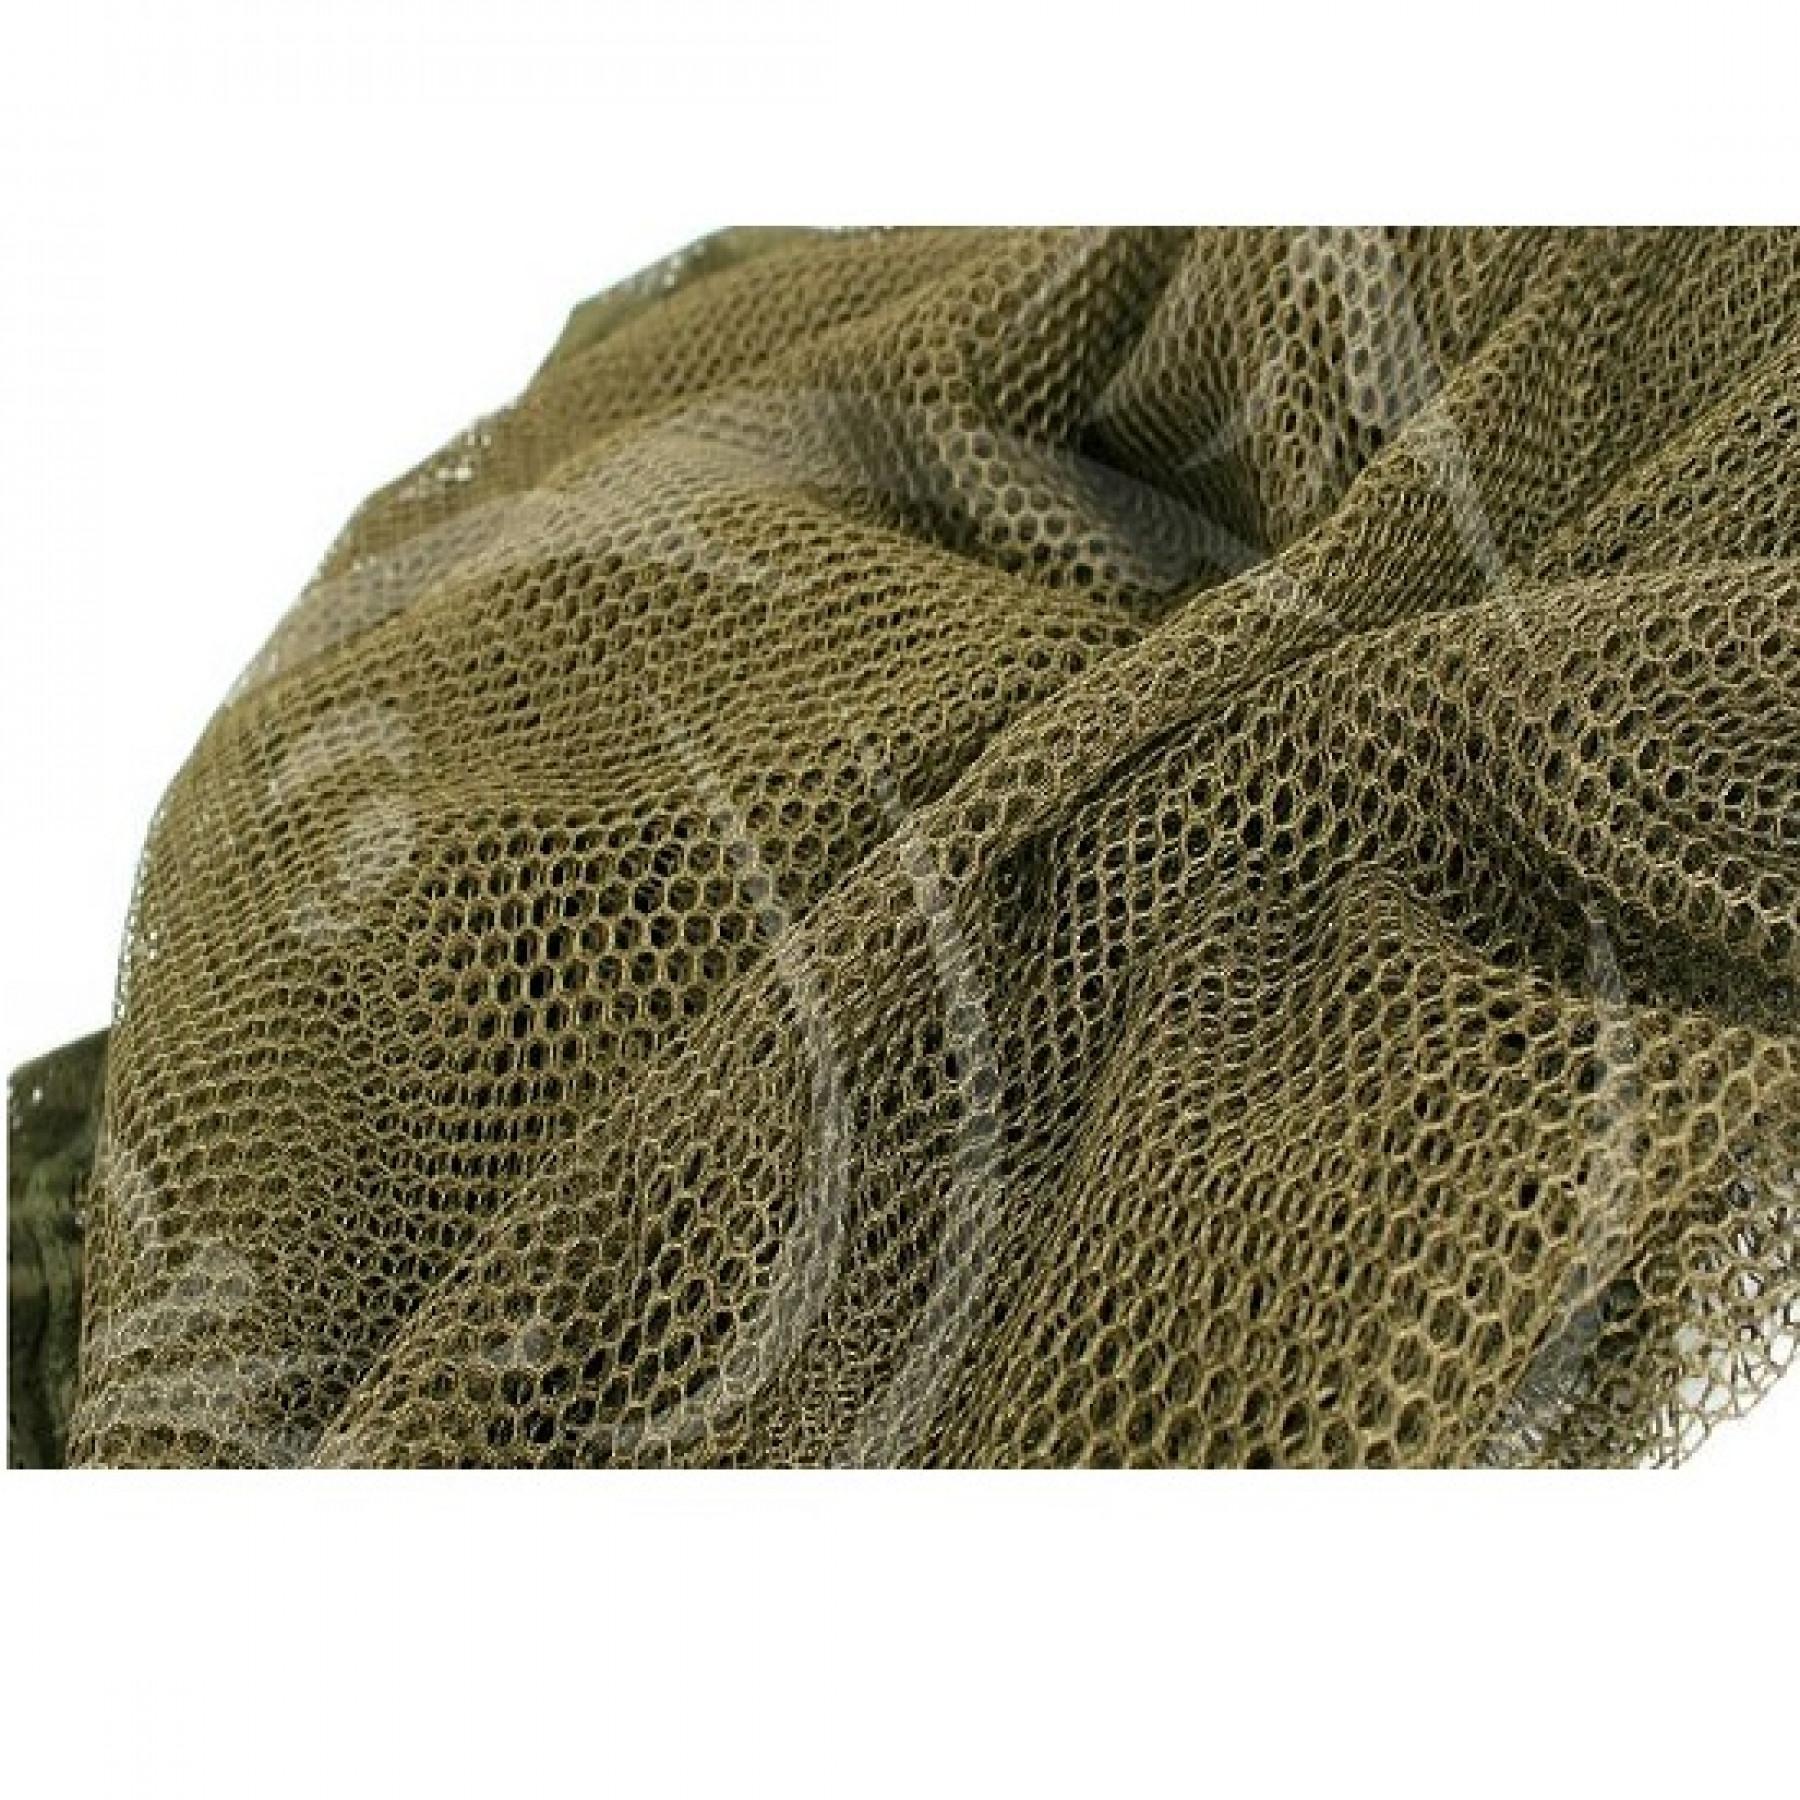 Filet Nash Spare 42 Net Mesh with Fish Print